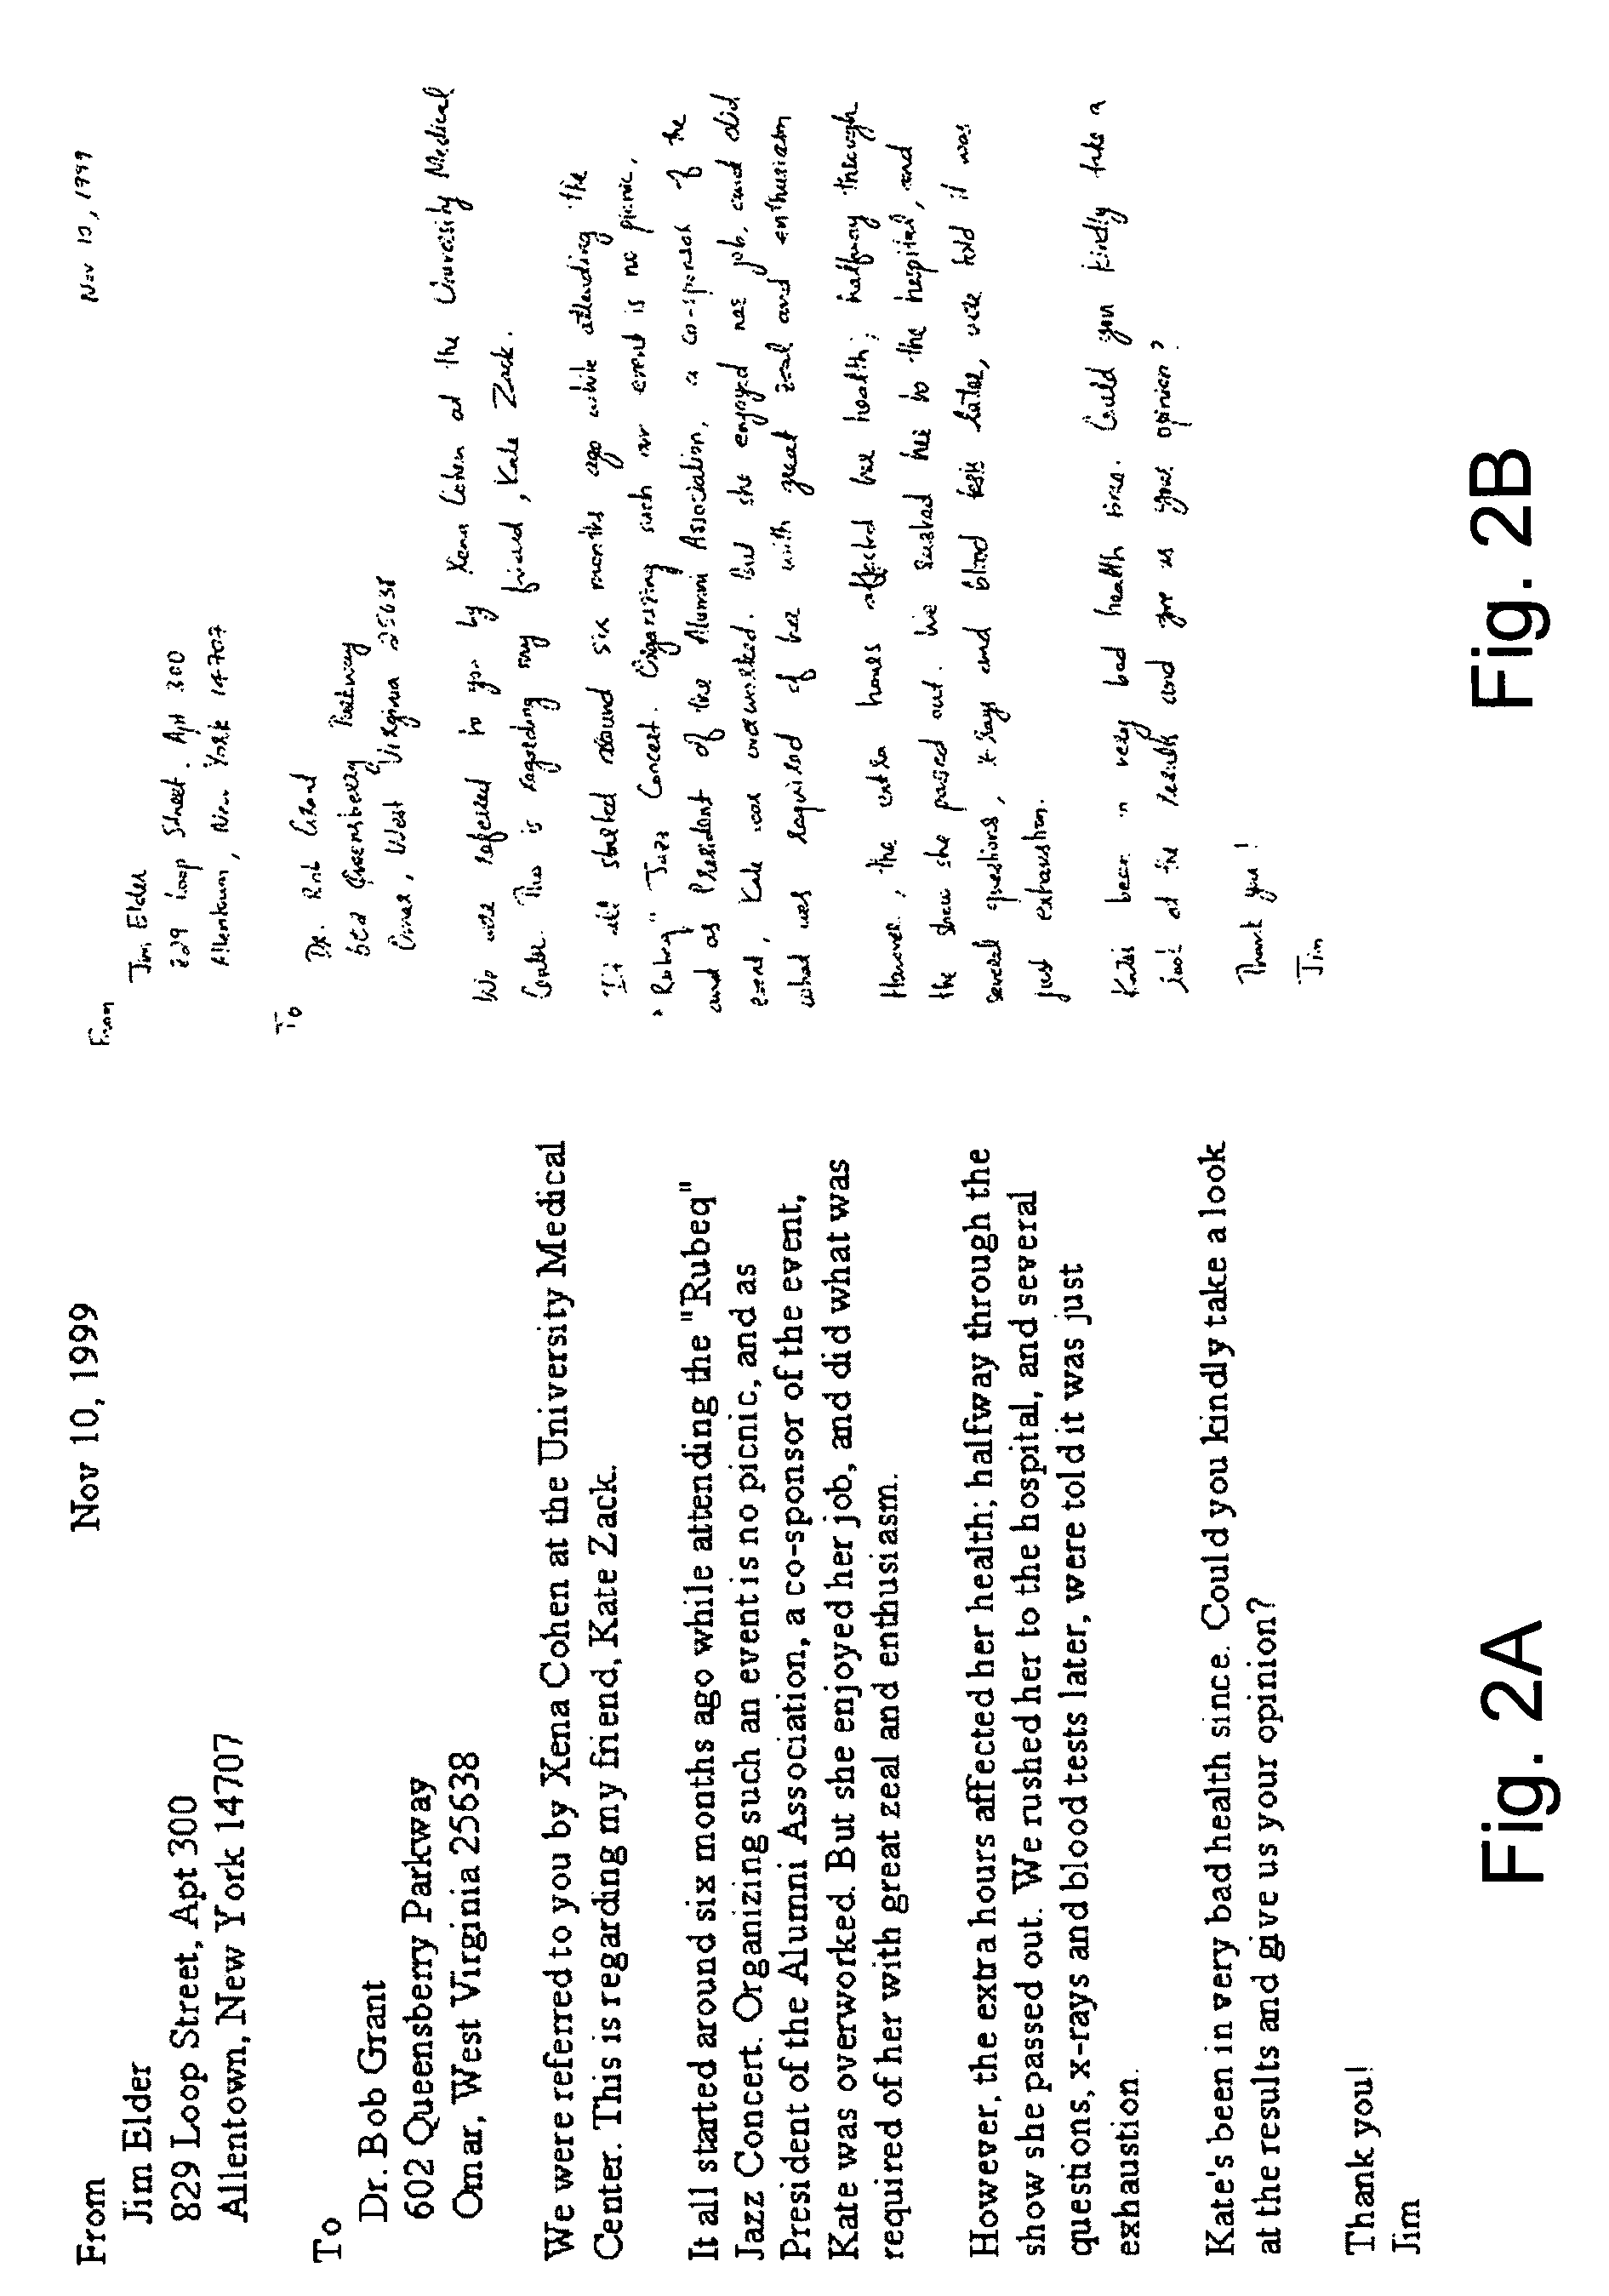 Method and apparatus for analyzing and/or comparing handwritten and/or biometric samples